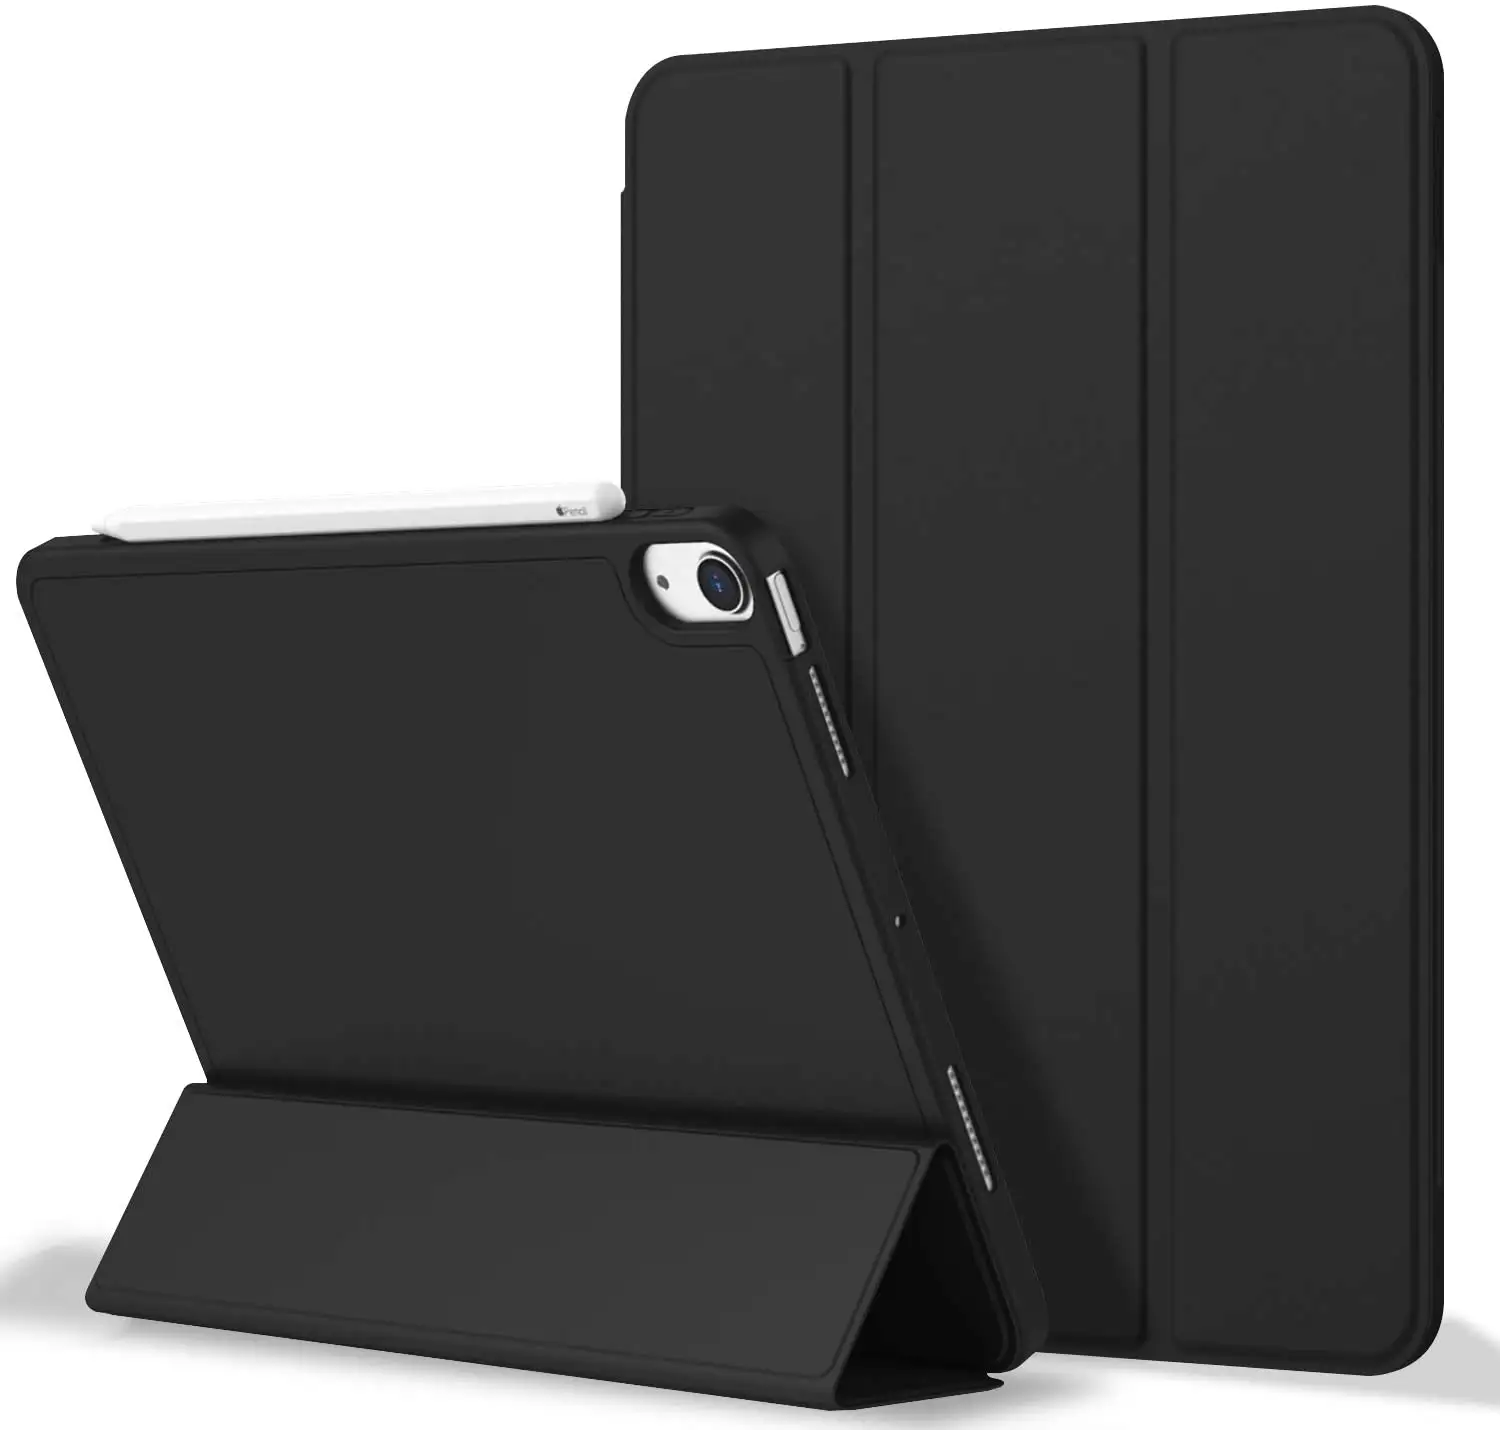 Soft Case for iPad 2020 air 4 10.9 inch tablet case Protective Shell Cover pen holder